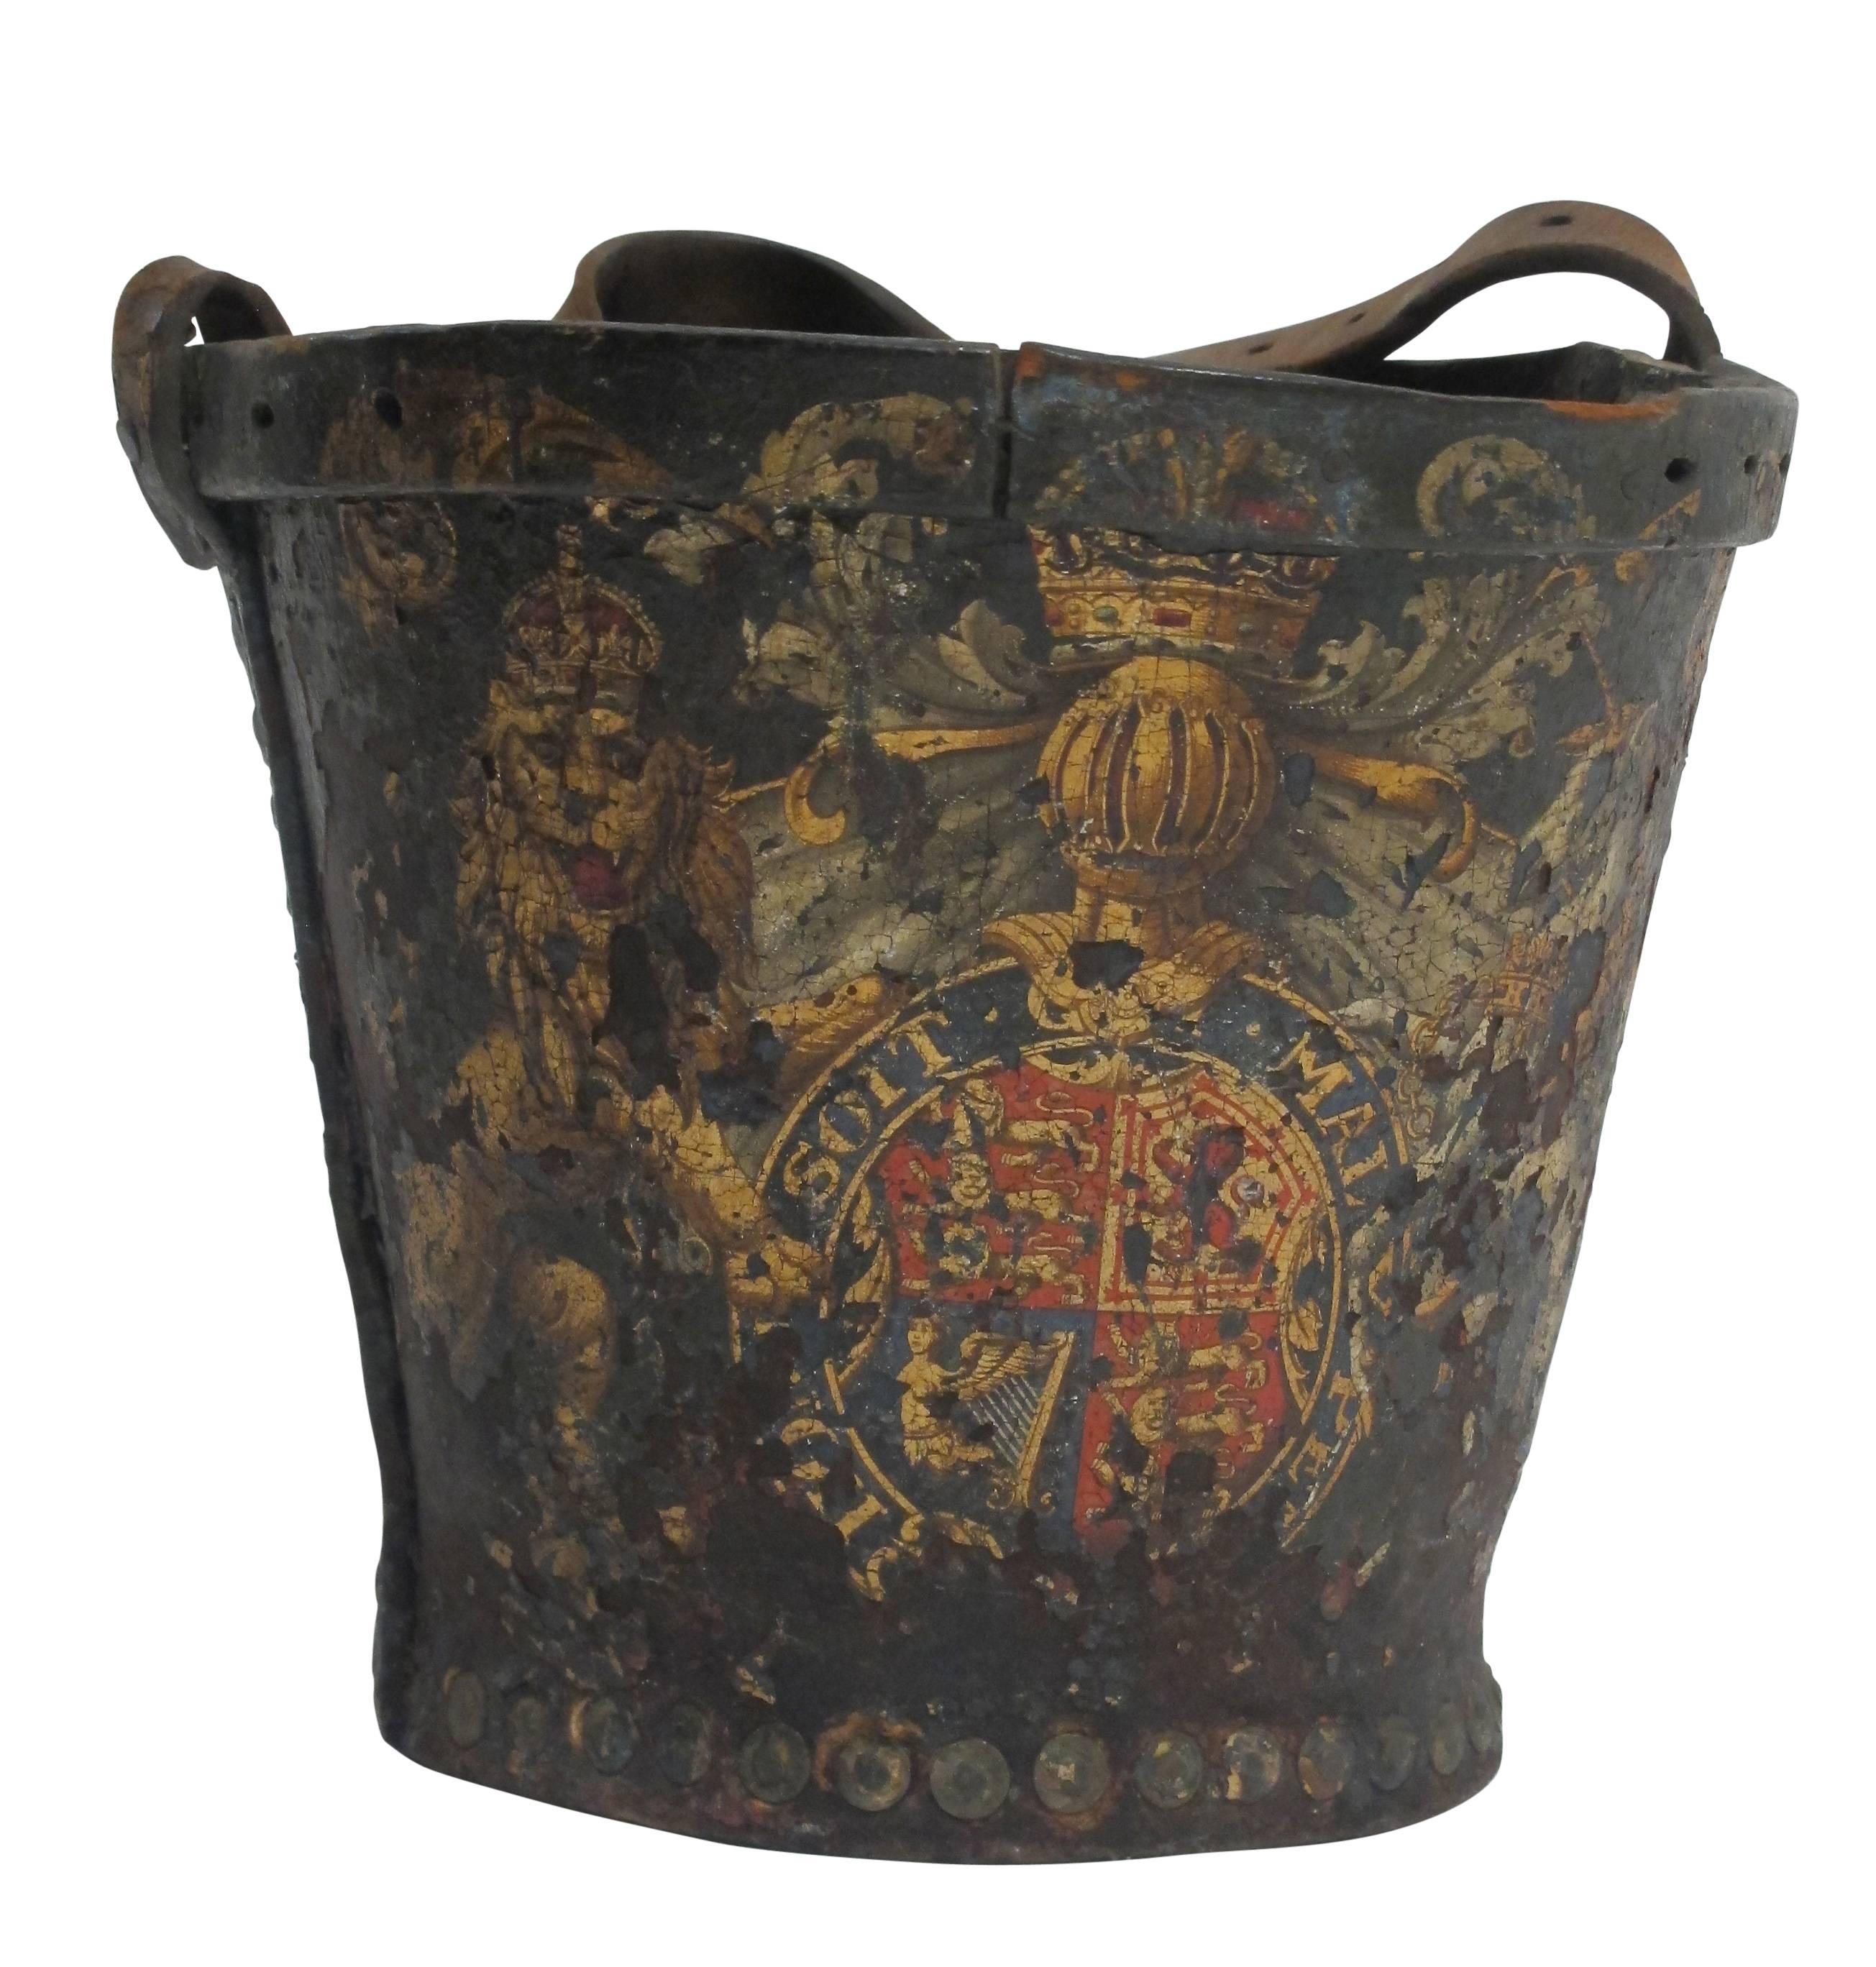 Antique black leather fire bucket with hand-painted elaborate British insignia, England, early 19th century.